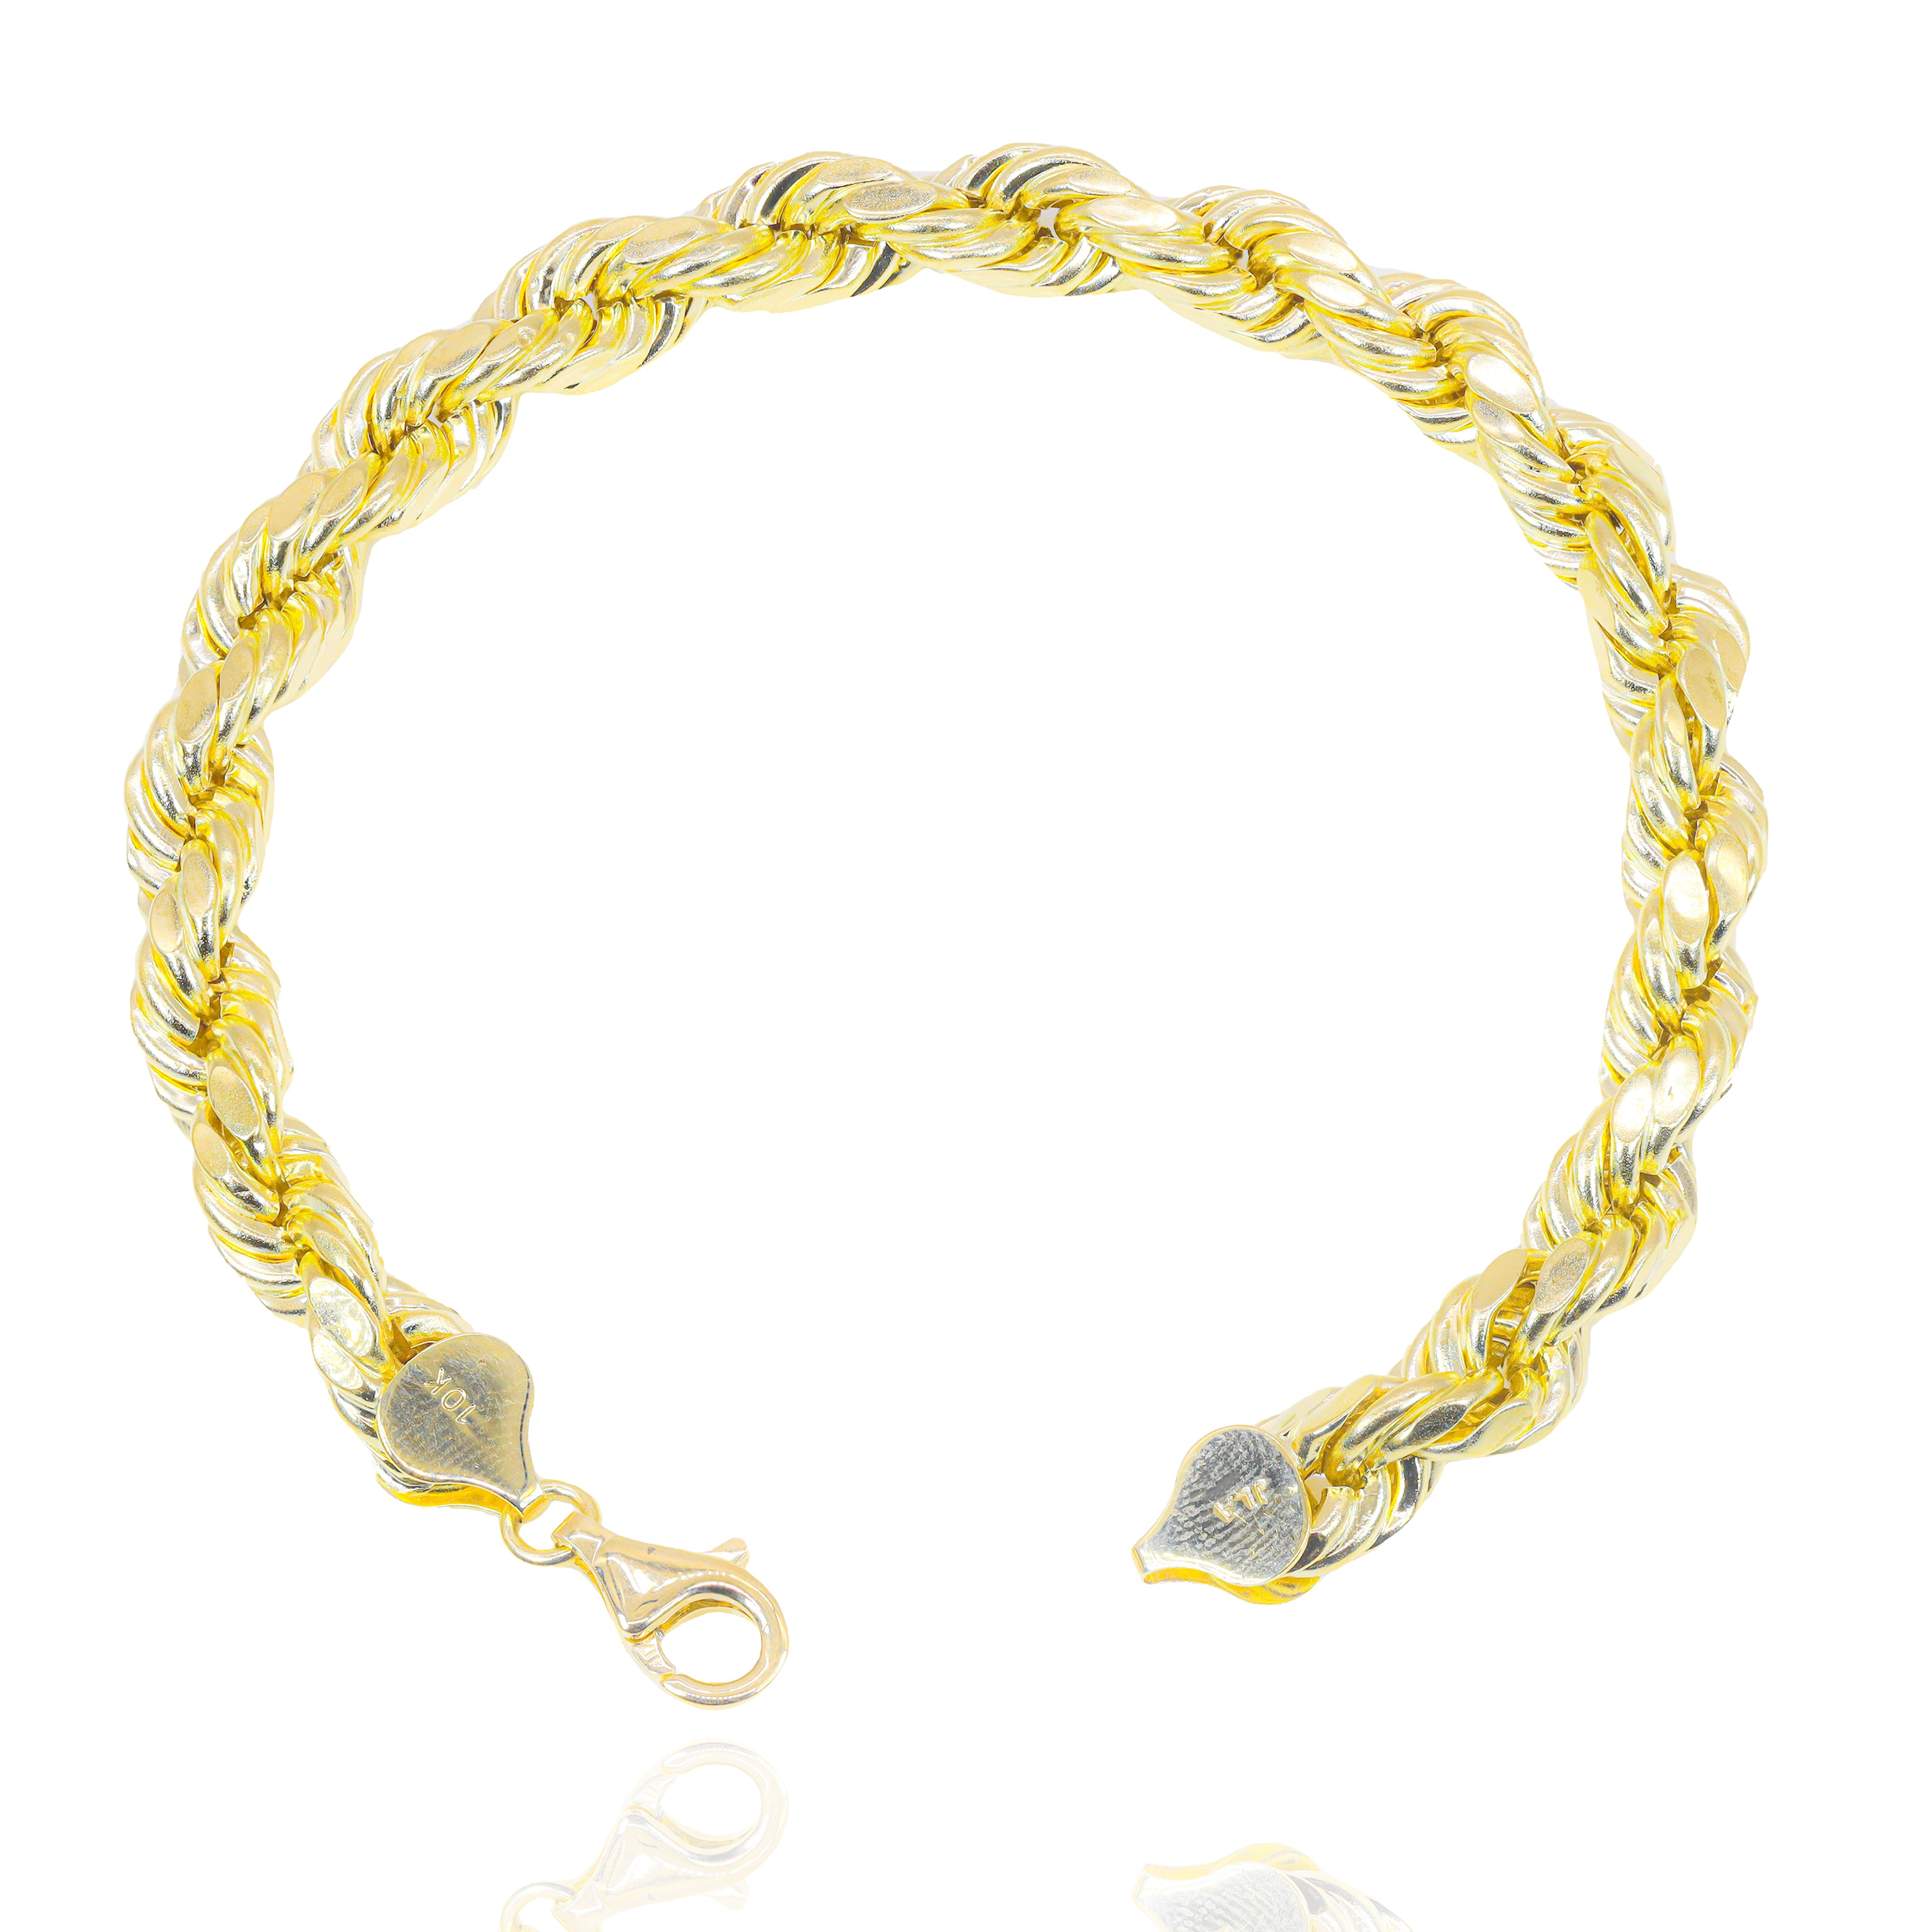 10KT Yellow Gold Semi-Solid Rope Bracelet